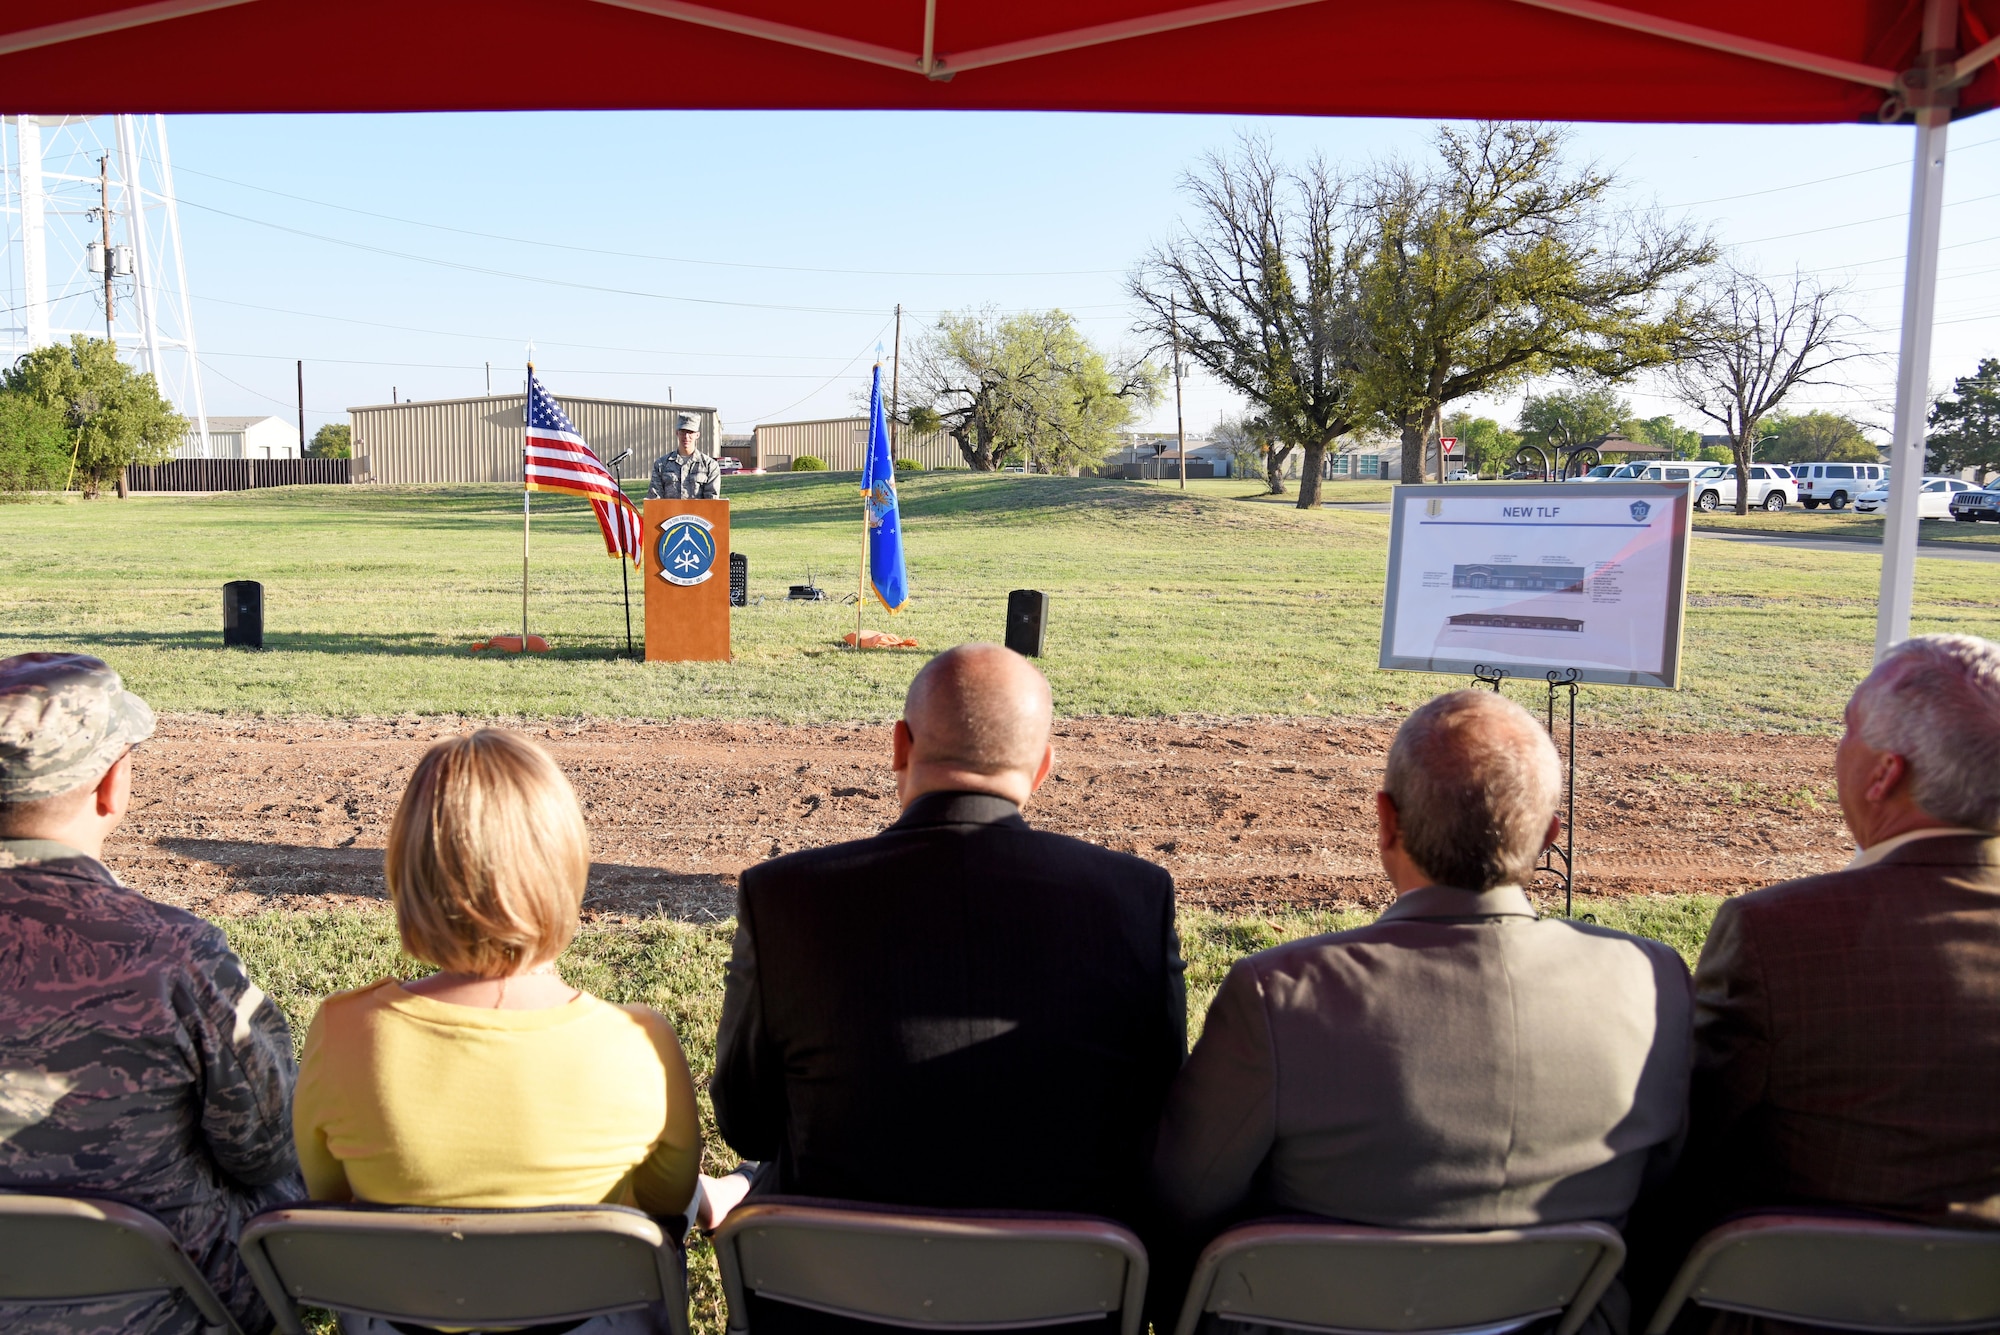 U.S. Air Force 2nd. Lt. Timothy Ruscio, 17th Civil Engineer Squadron operation engineer, provides the opening remarks for the new temporary lodging facility ground breaking near the base theater on Goodfellow Air Force Base, Texas March 20, 2017. The new TLF is designed to replace the 30-year-old units. (U.S. Air Force photo by Staff Sgt. Joshua Edwards/Released)